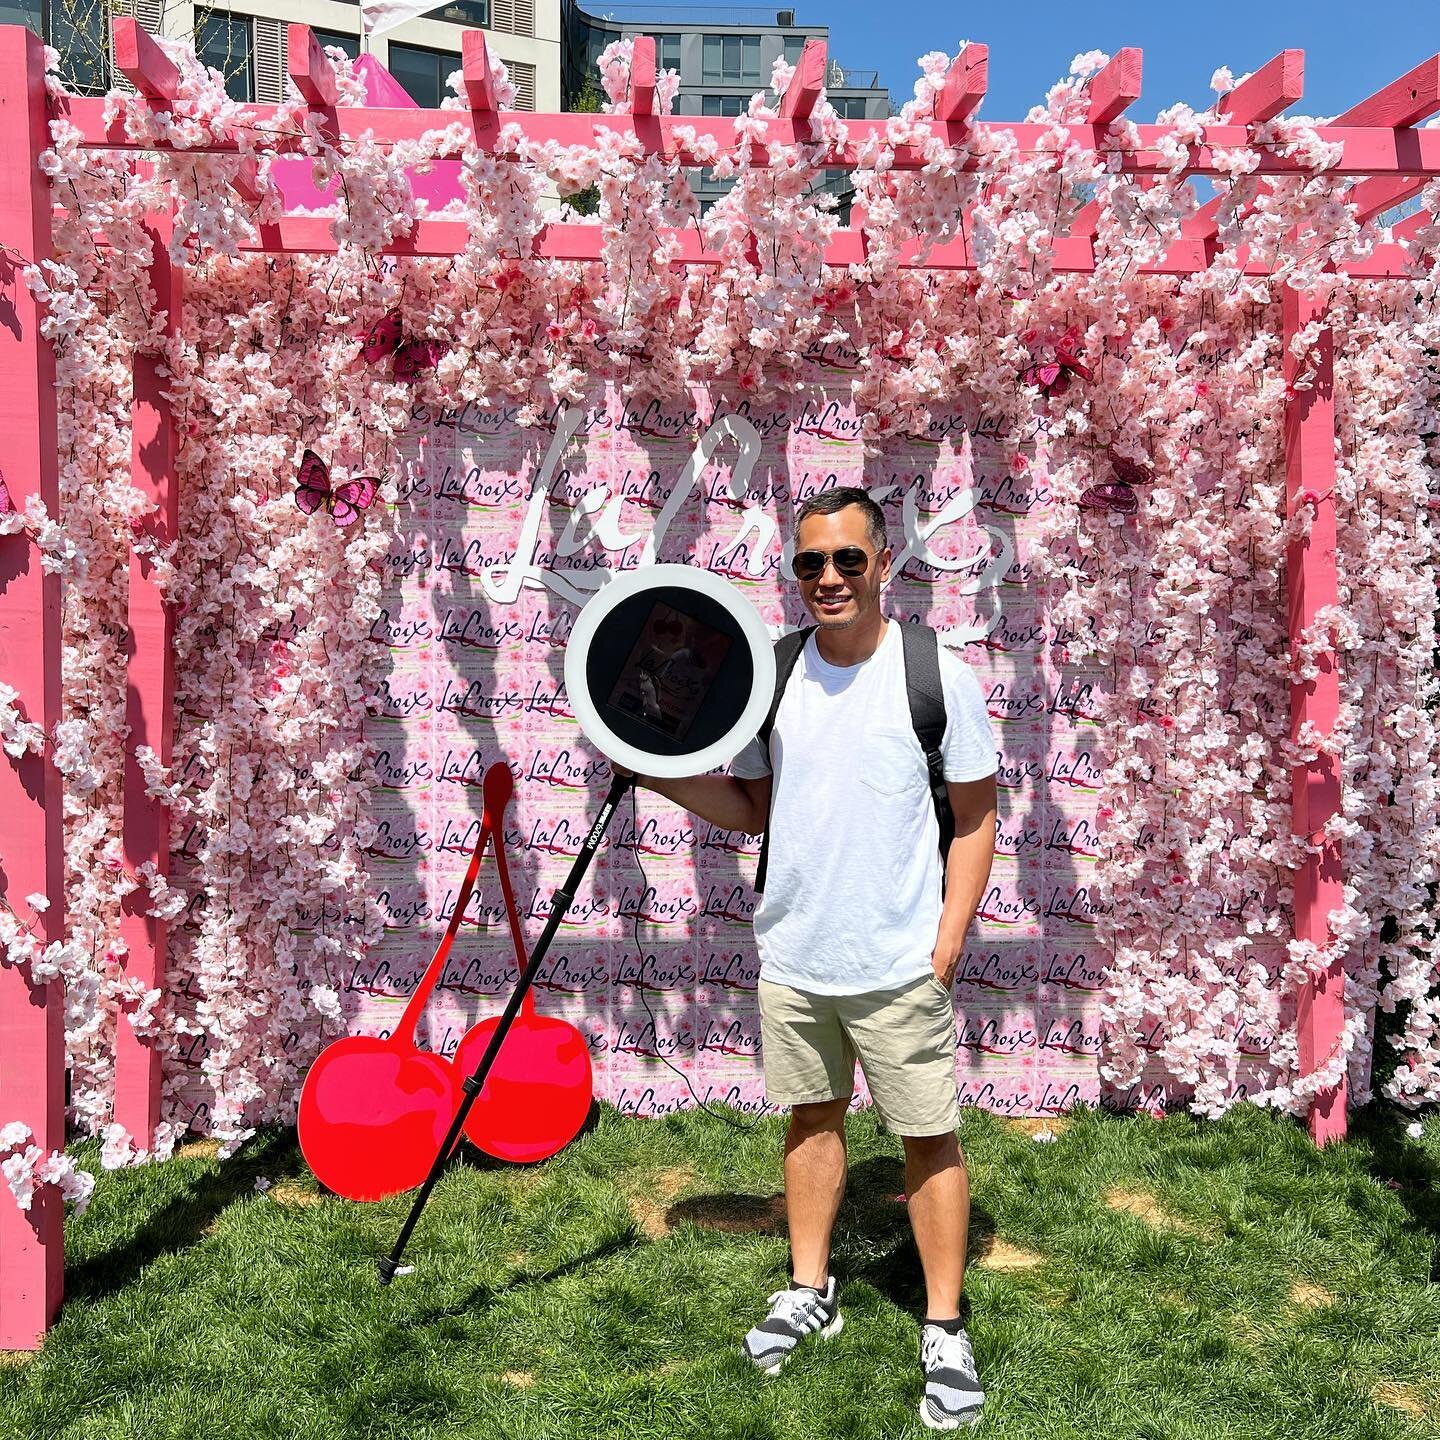 We&rsquo;re on the move! Our roaming photo booth activation was a hit at #petalpalooza this year at the @yardsparkdc for @lacroixwater release of their cherry blossom flavored water. Guests were able to take single photos, gifs and boomerangs. Everyo